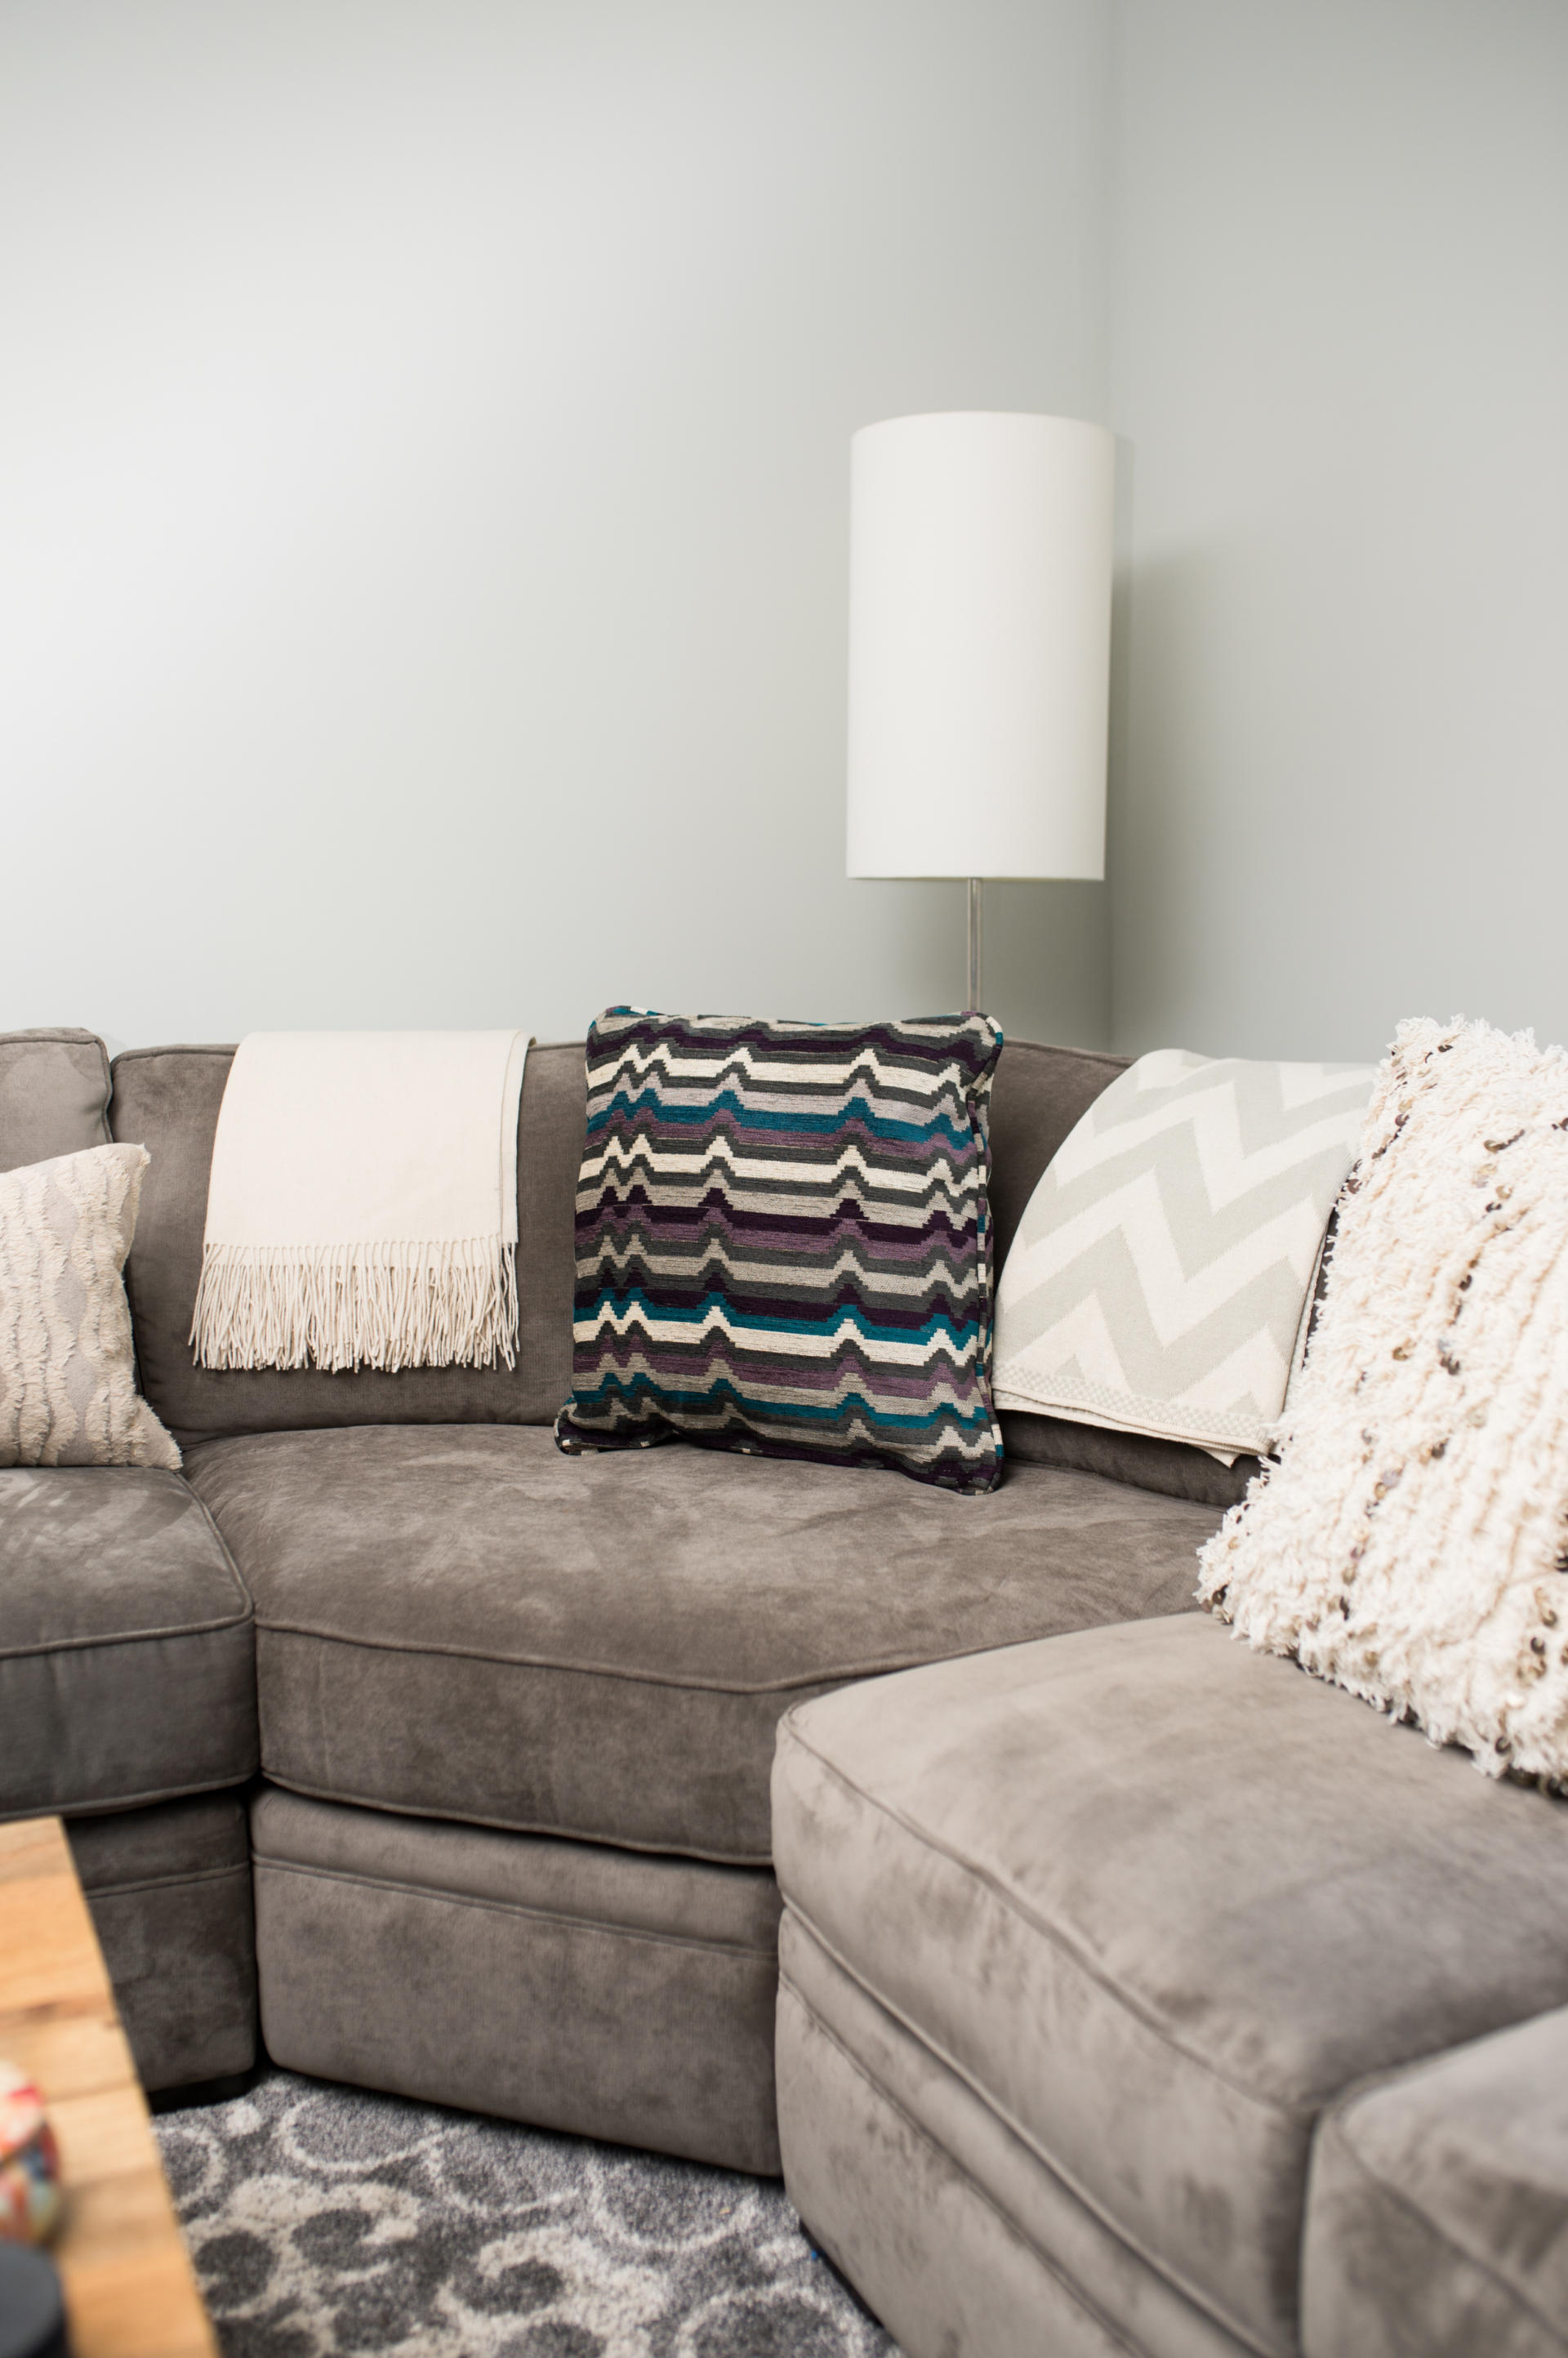 HOME: Our New Living Room with Raymour and Flanigan Sofa by New Jersey lifestyle blogger What's For Dinner Esq.